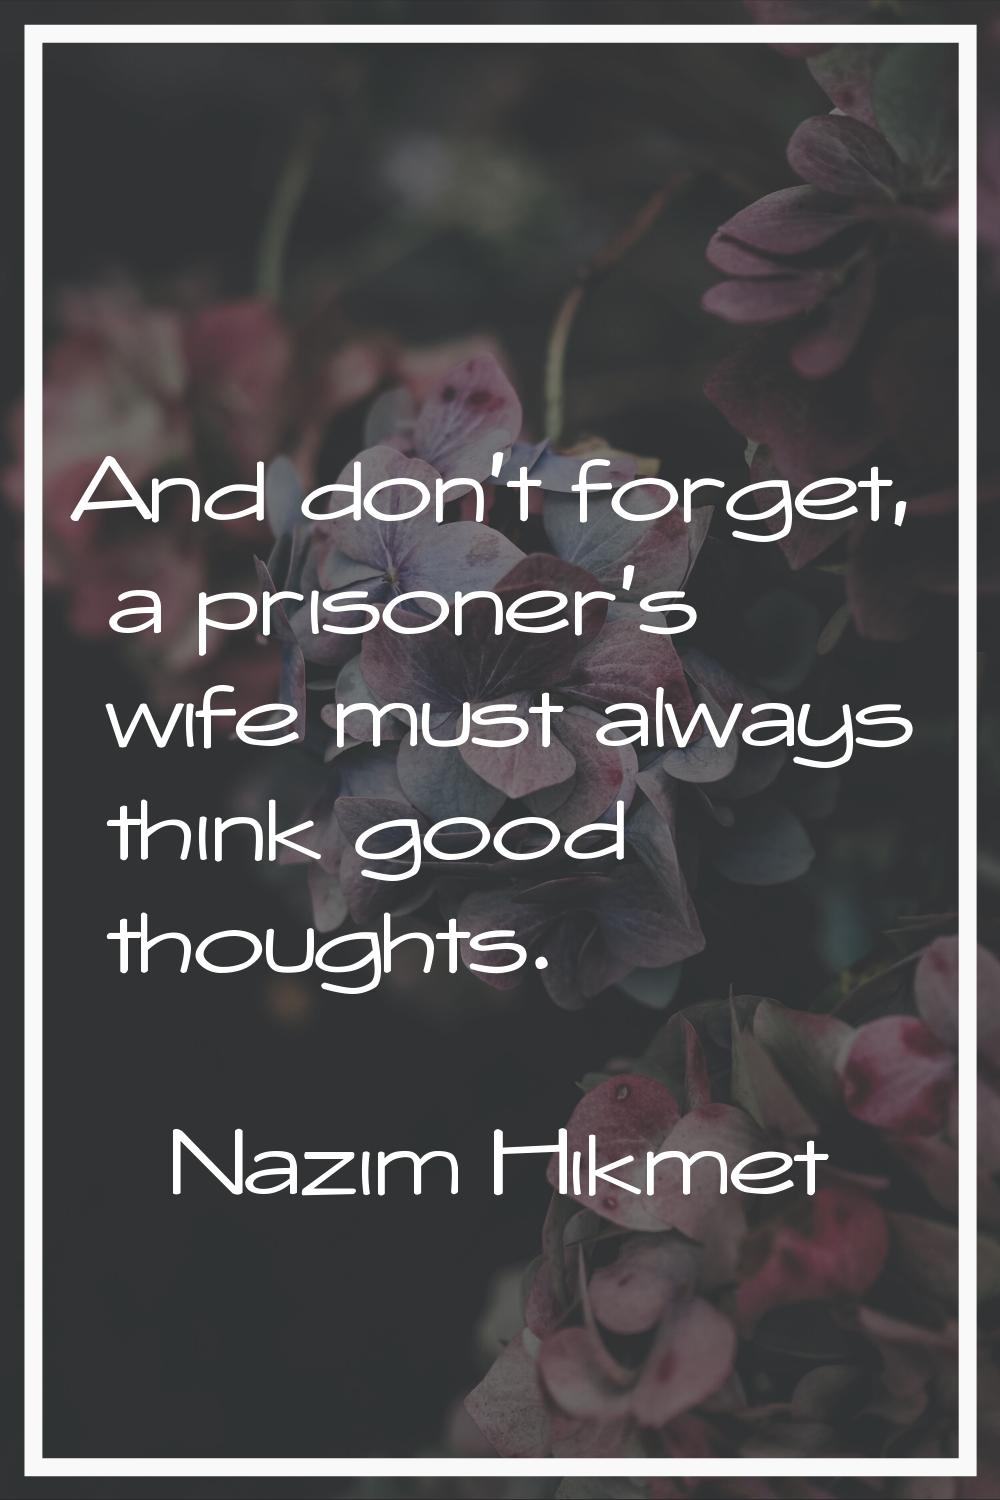 And don't forget, a prisoner's wife must always think good thoughts.